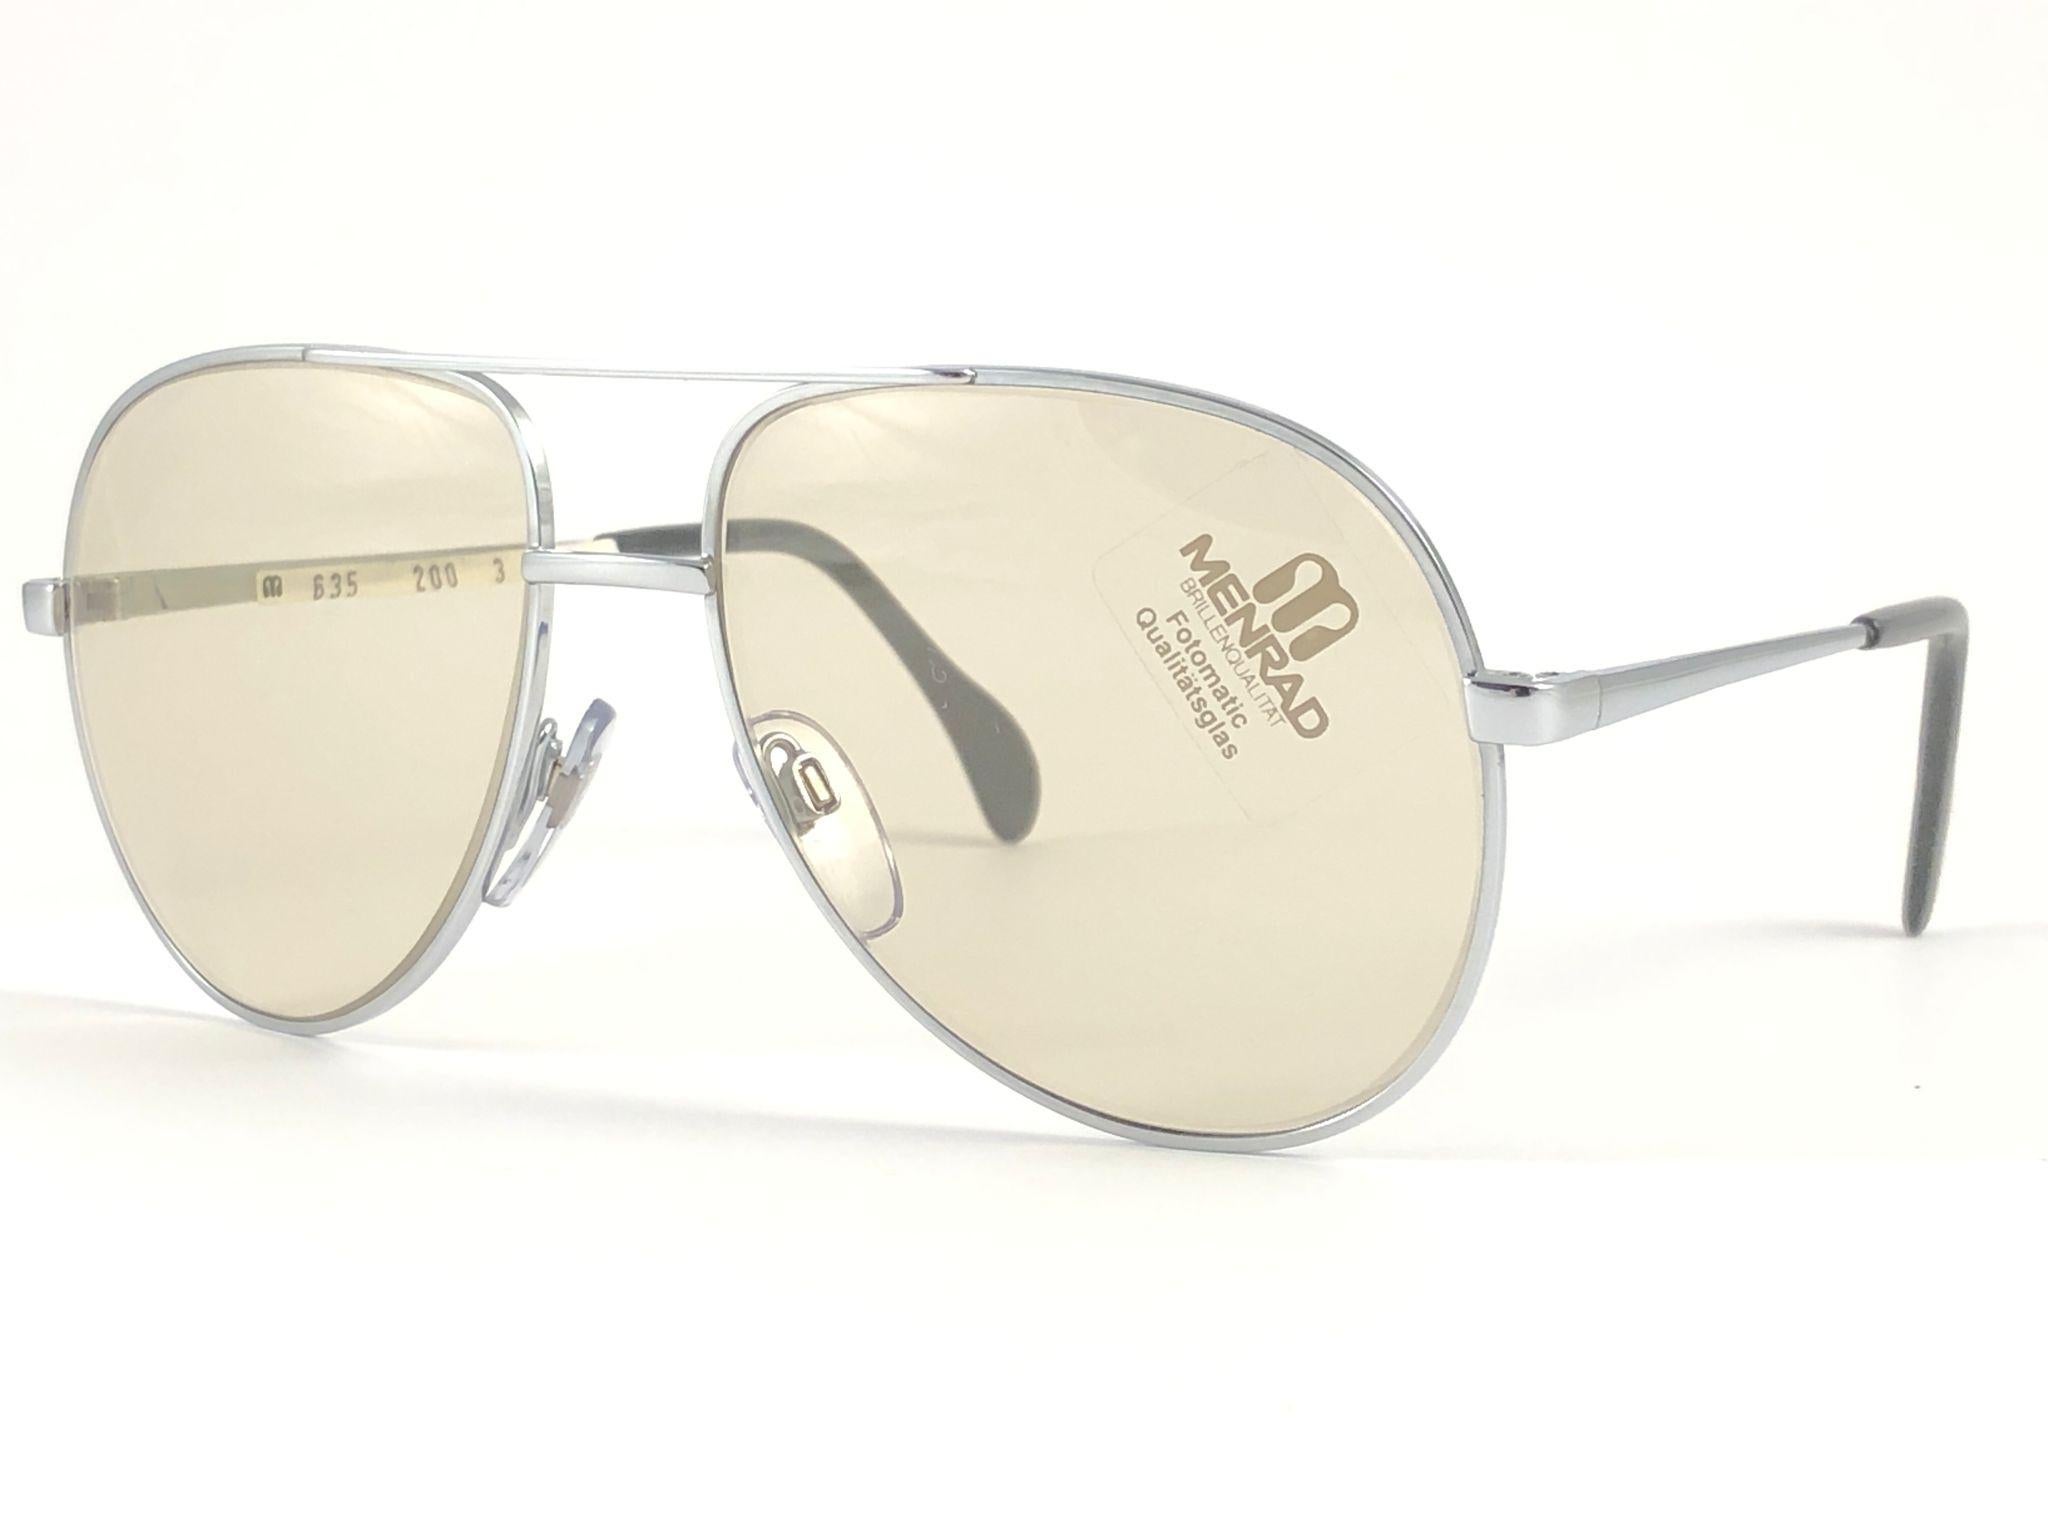 New Vintage Menrad M635 Silver Oversized Made in Germany 1970 Sunglasses  In New Condition For Sale In Baleares, Baleares